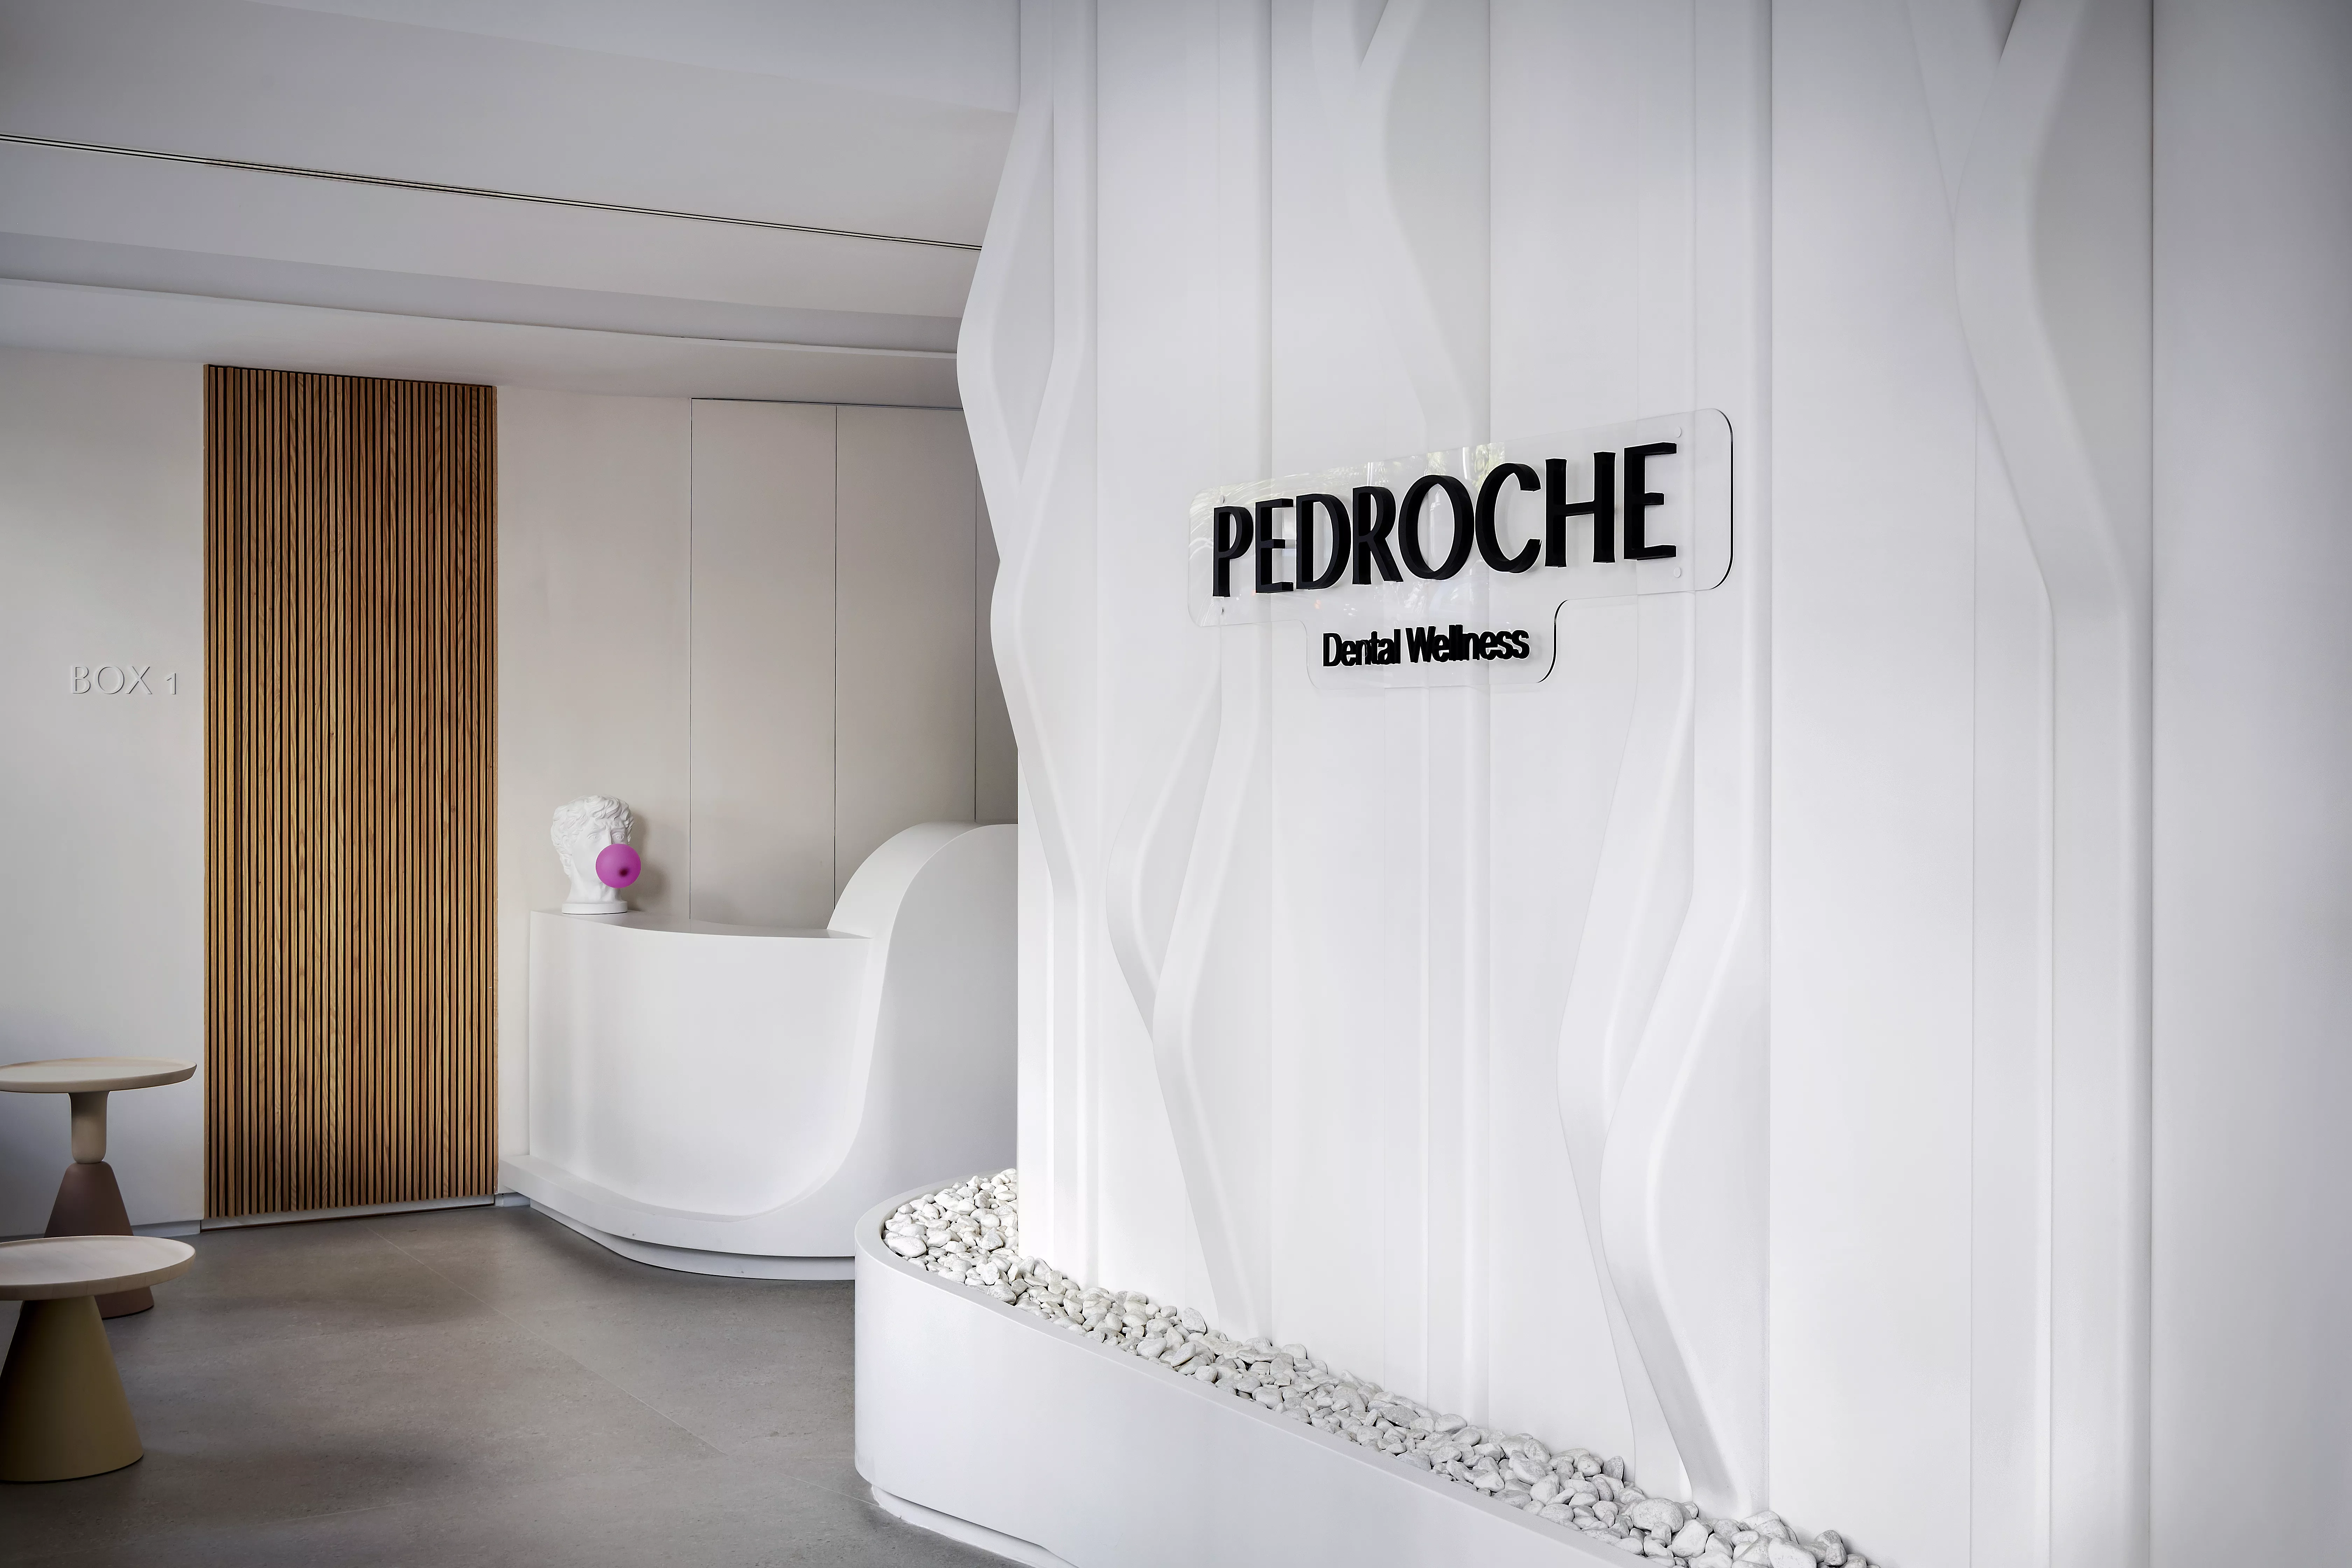 A project implemented with HIMACS for an innovative dental clinic in Madrid